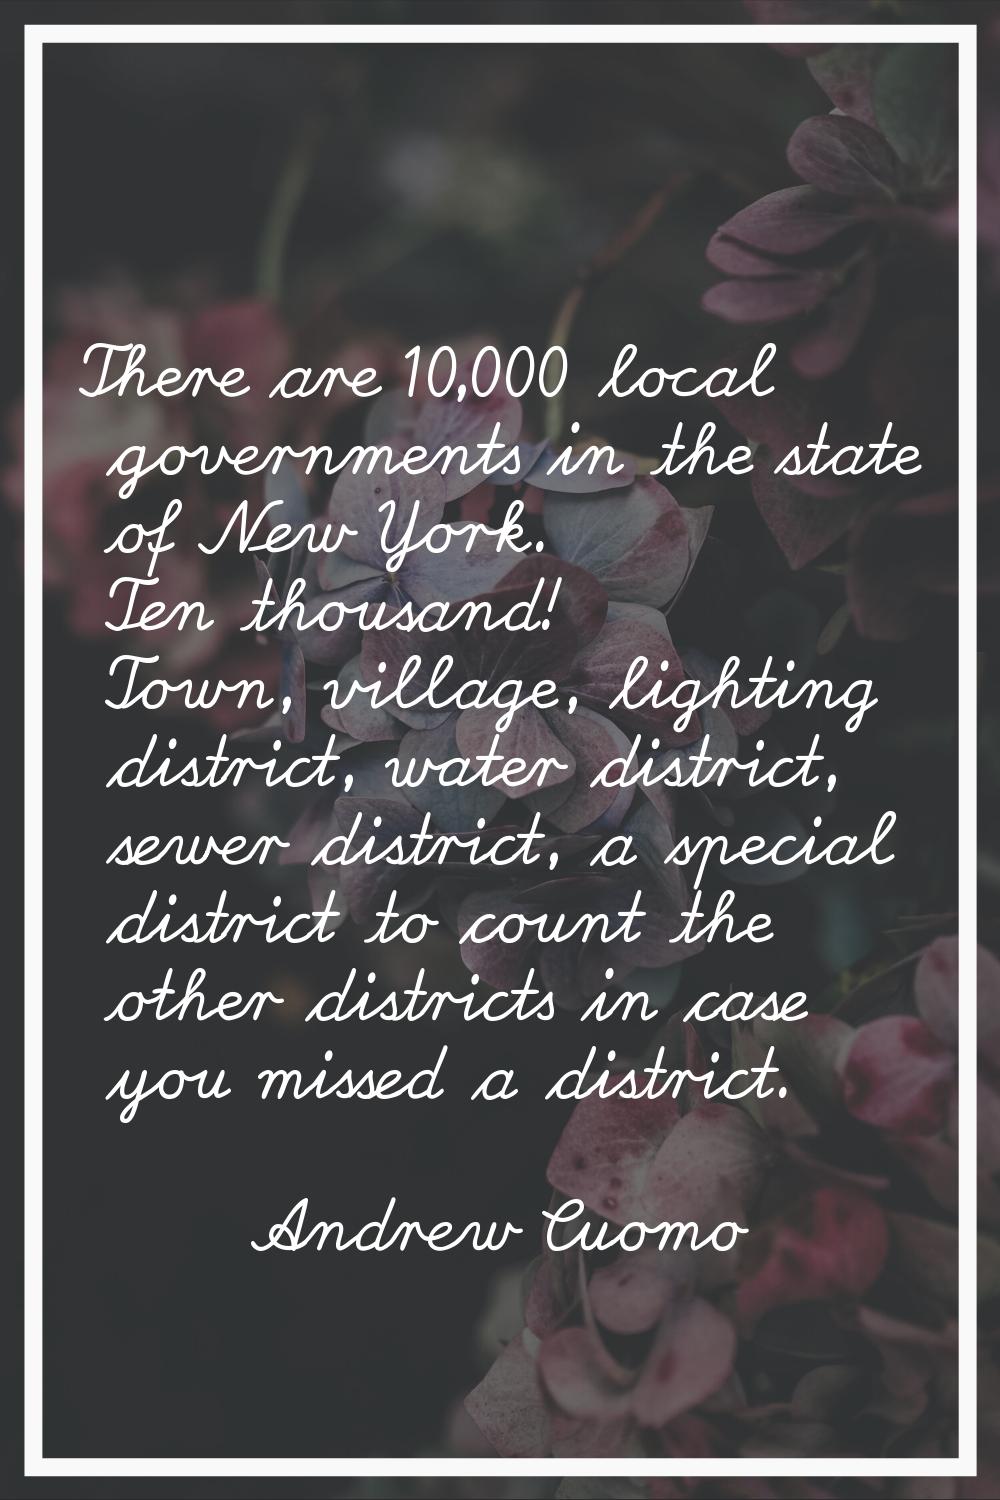 There are 10,000 local governments in the state of New York. Ten thousand! Town, village, lighting 